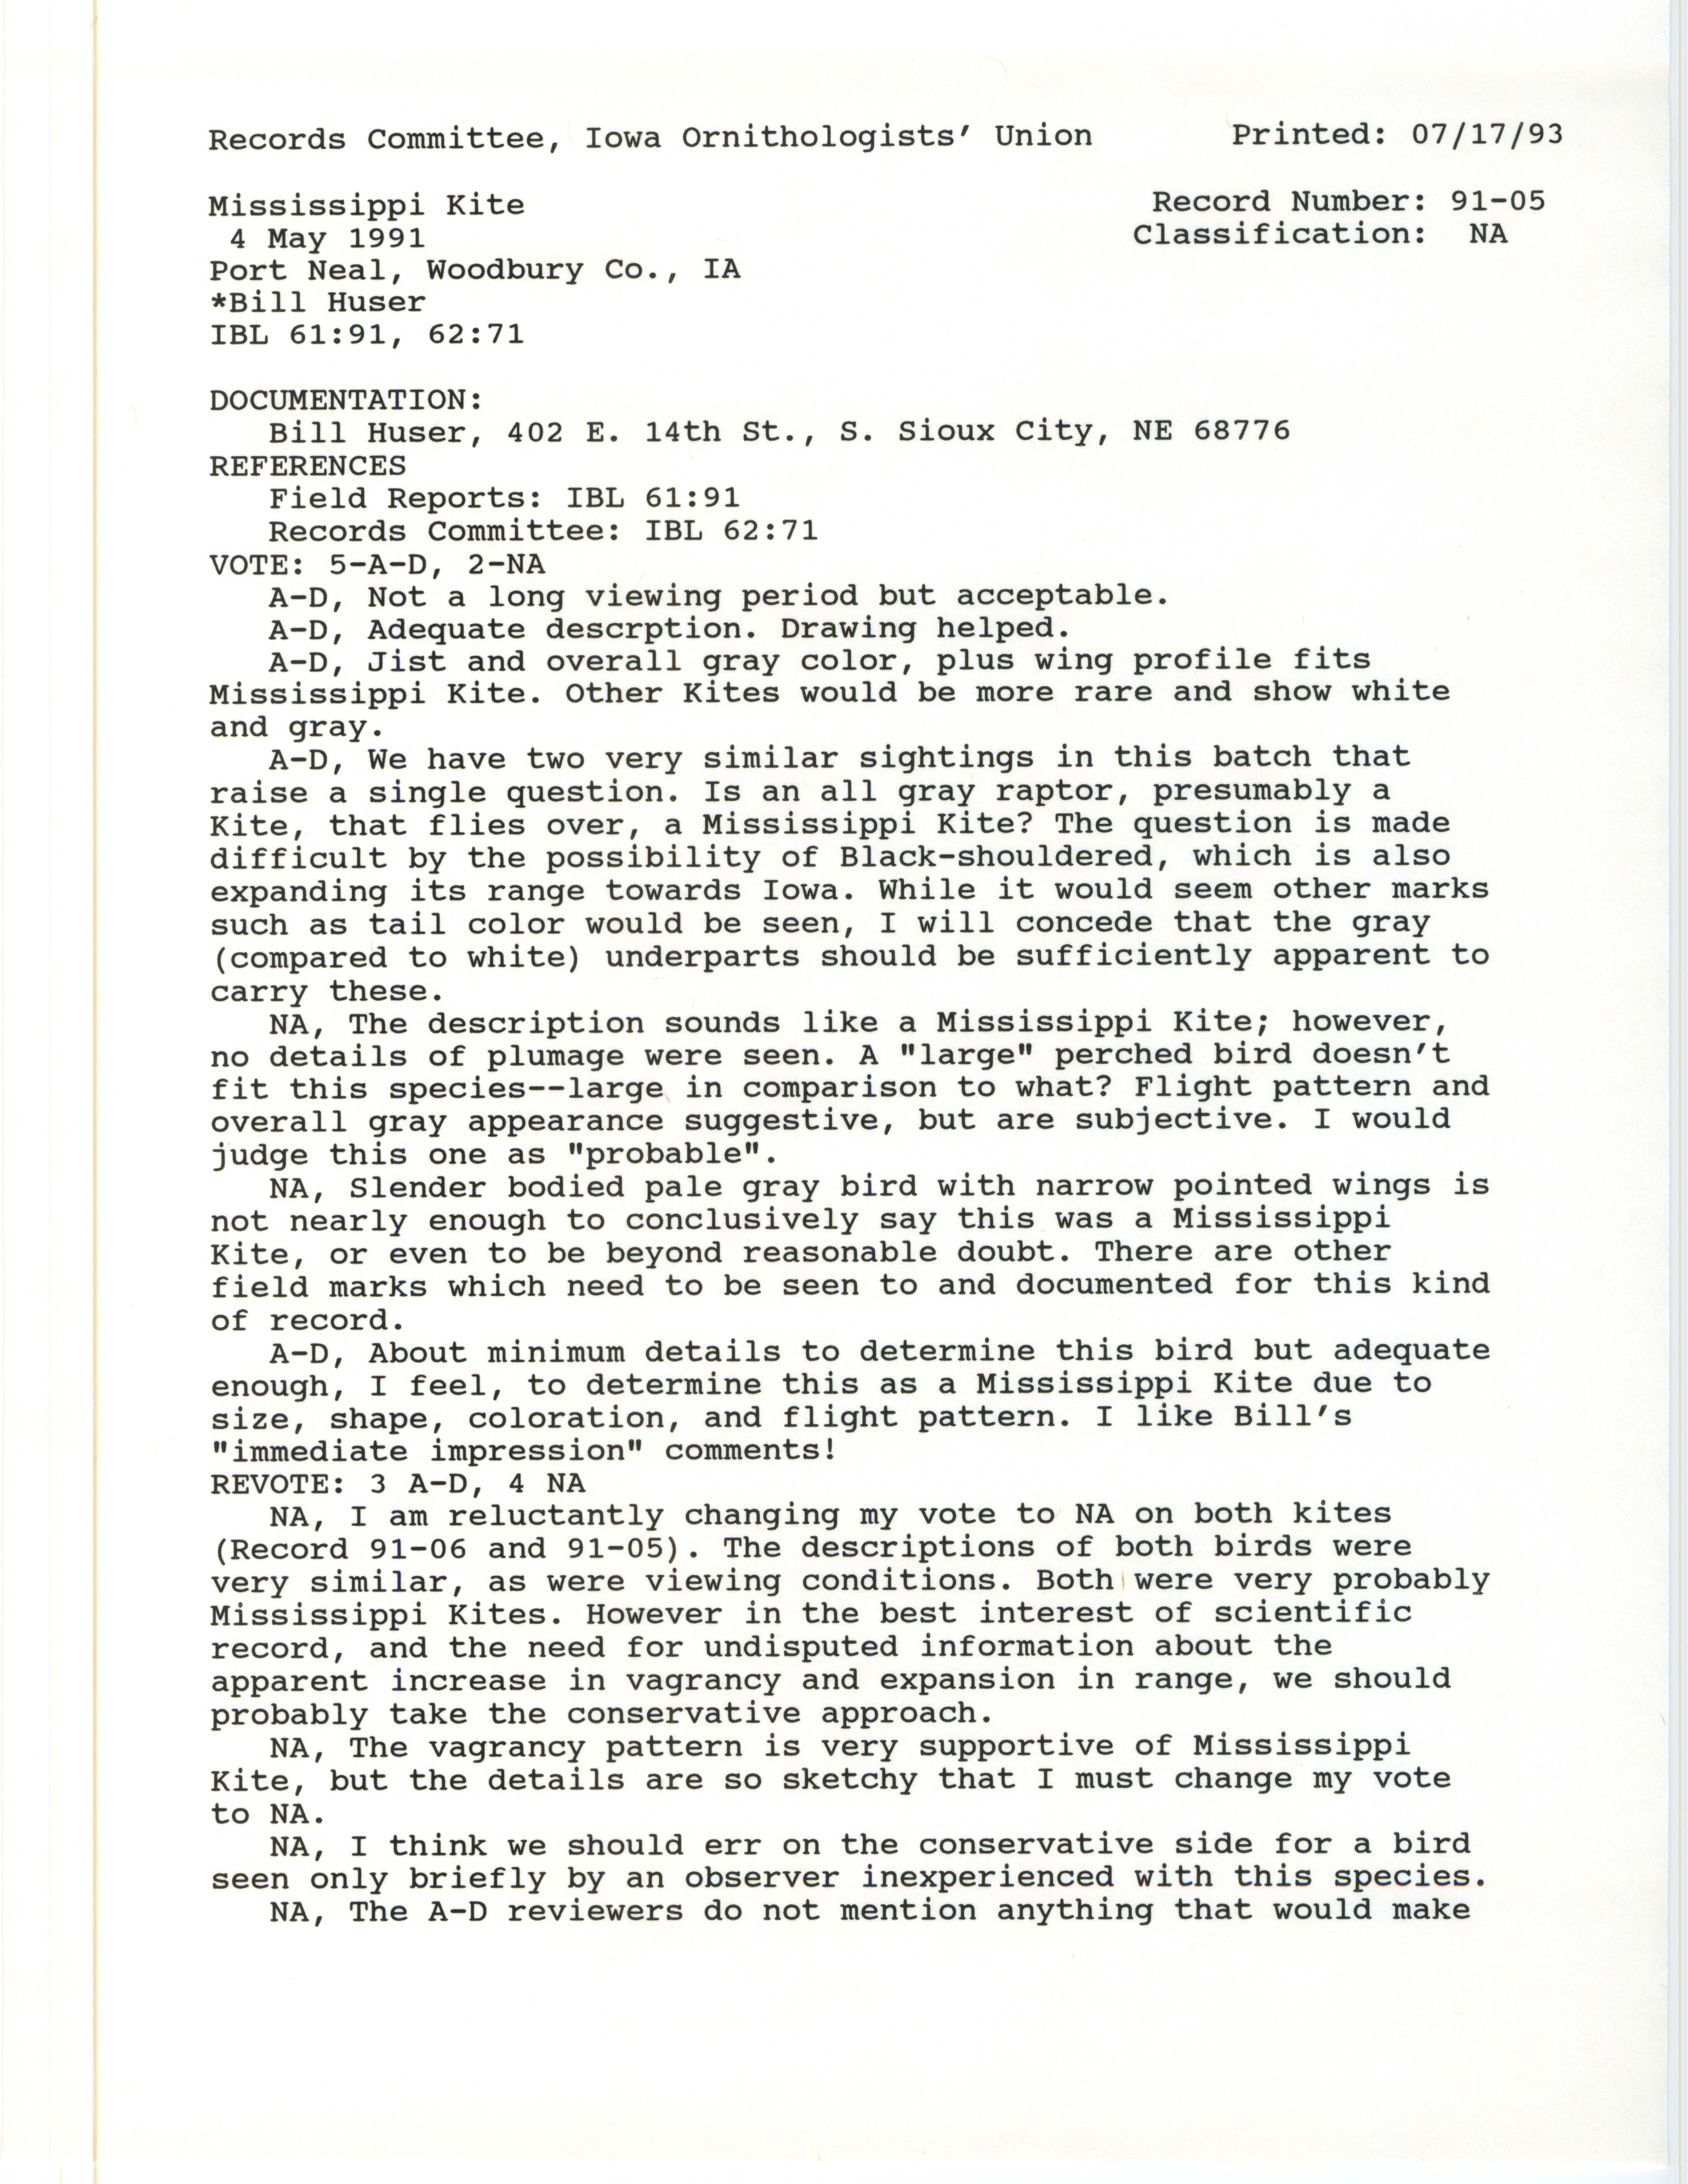 Records Committee review for rare bird sighting of Mississippi Kite at Port Neal, 1991